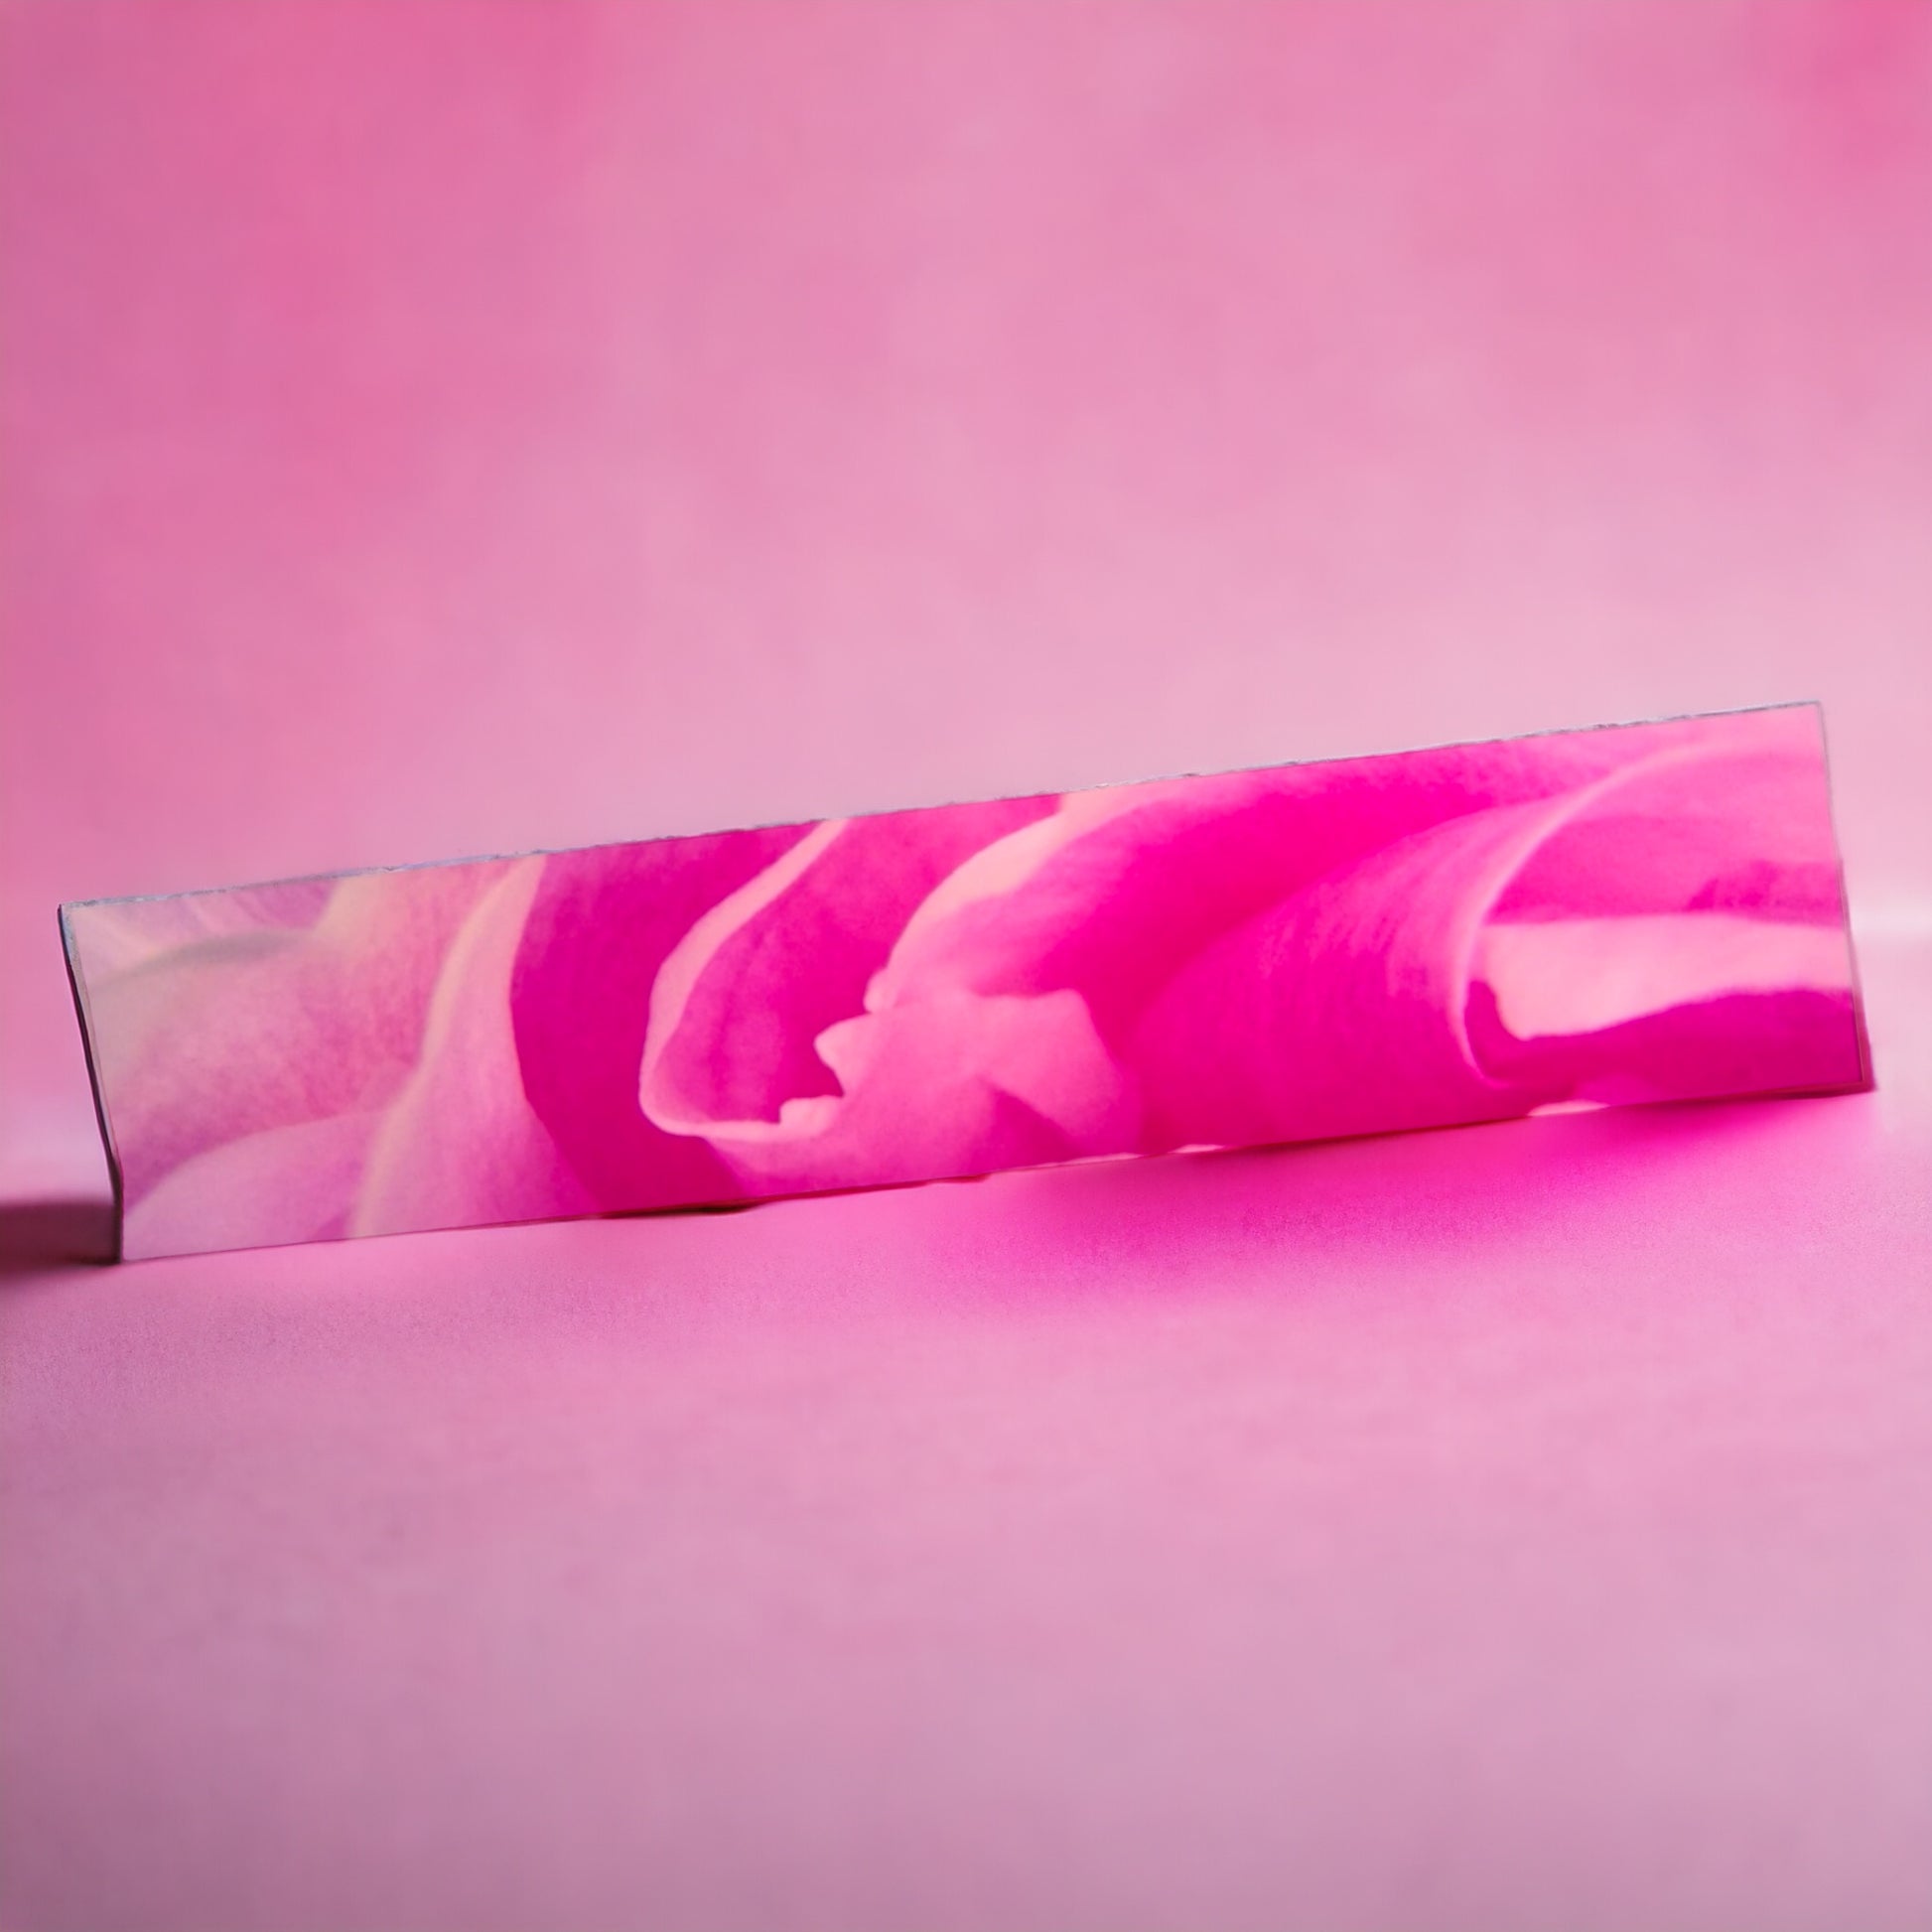 Rose petal kiss shown full length on a pink background.